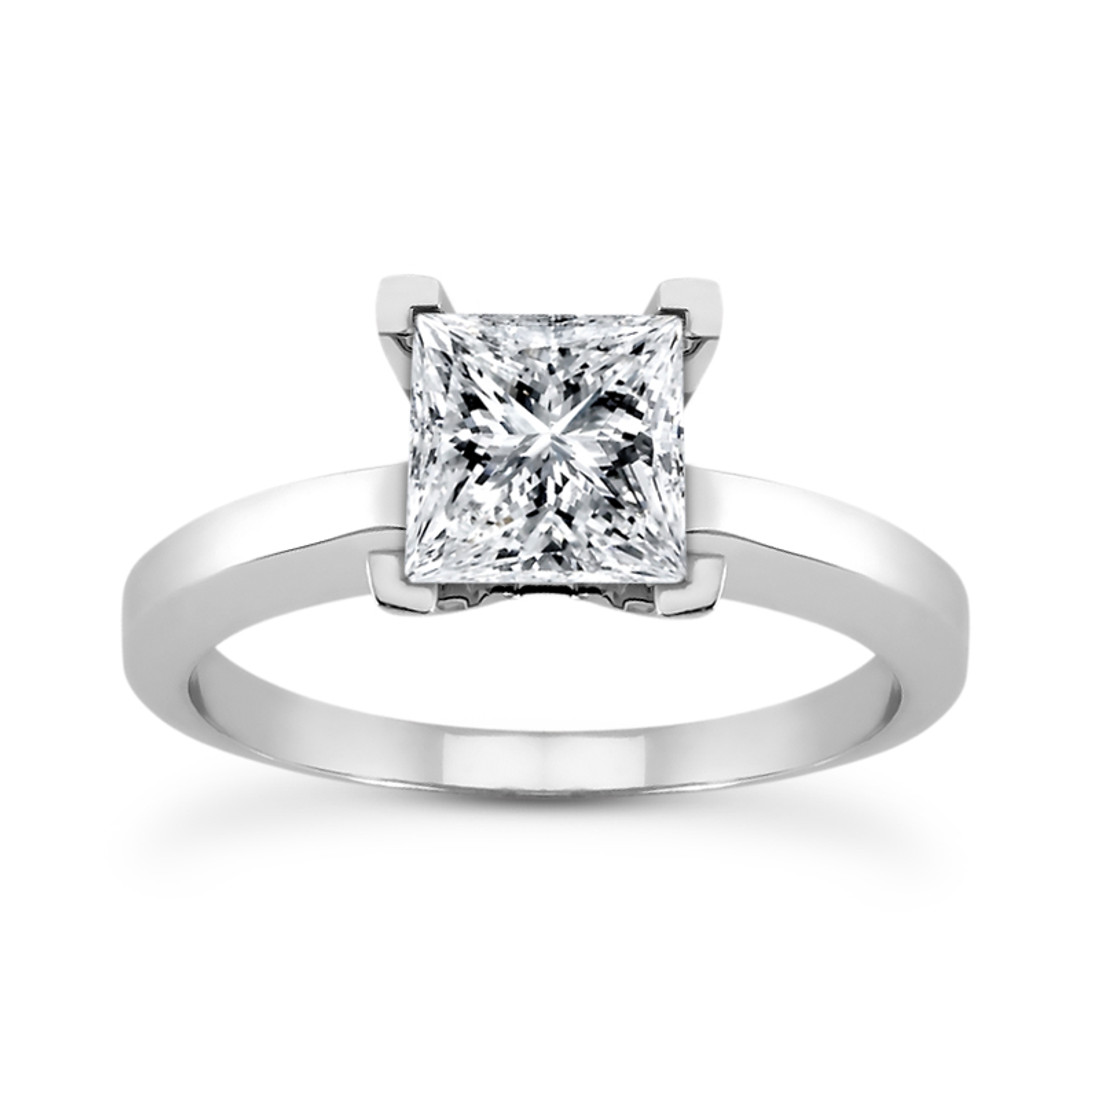 Princess-Cut Square Solitaire Engagement Ring Mounting